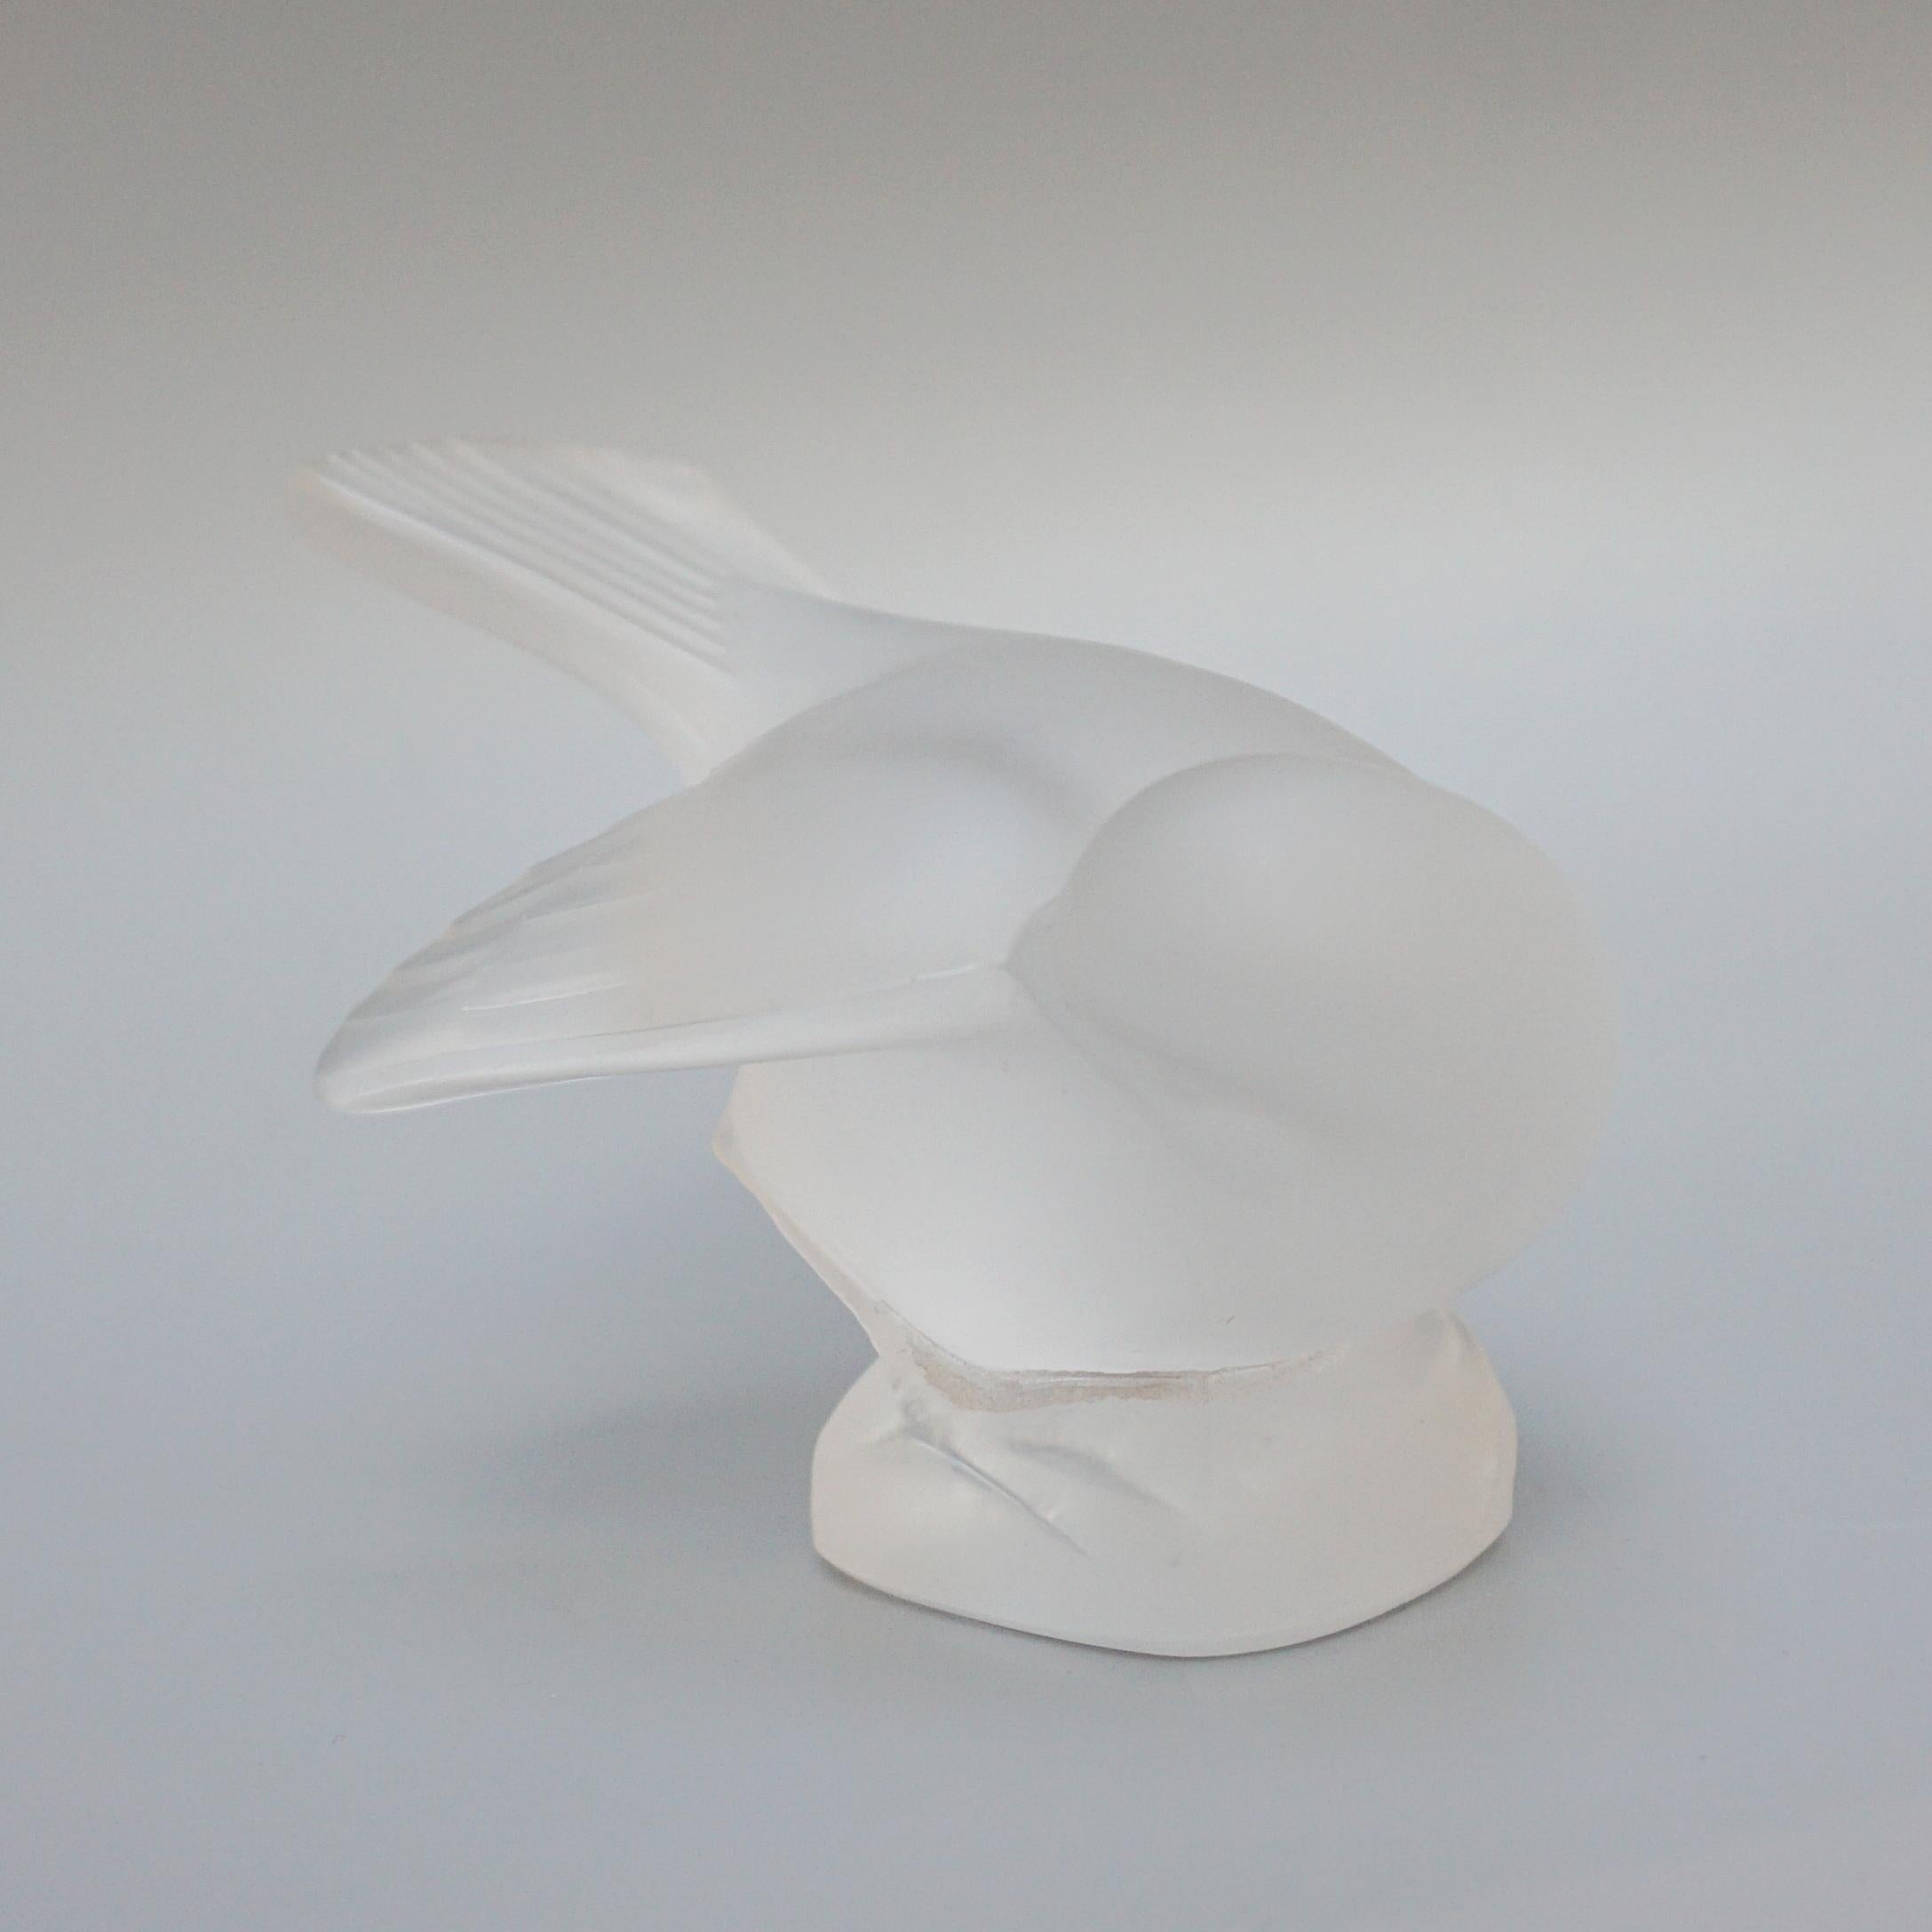 French Moineau Coquet A Glass Paperweight By Lalique